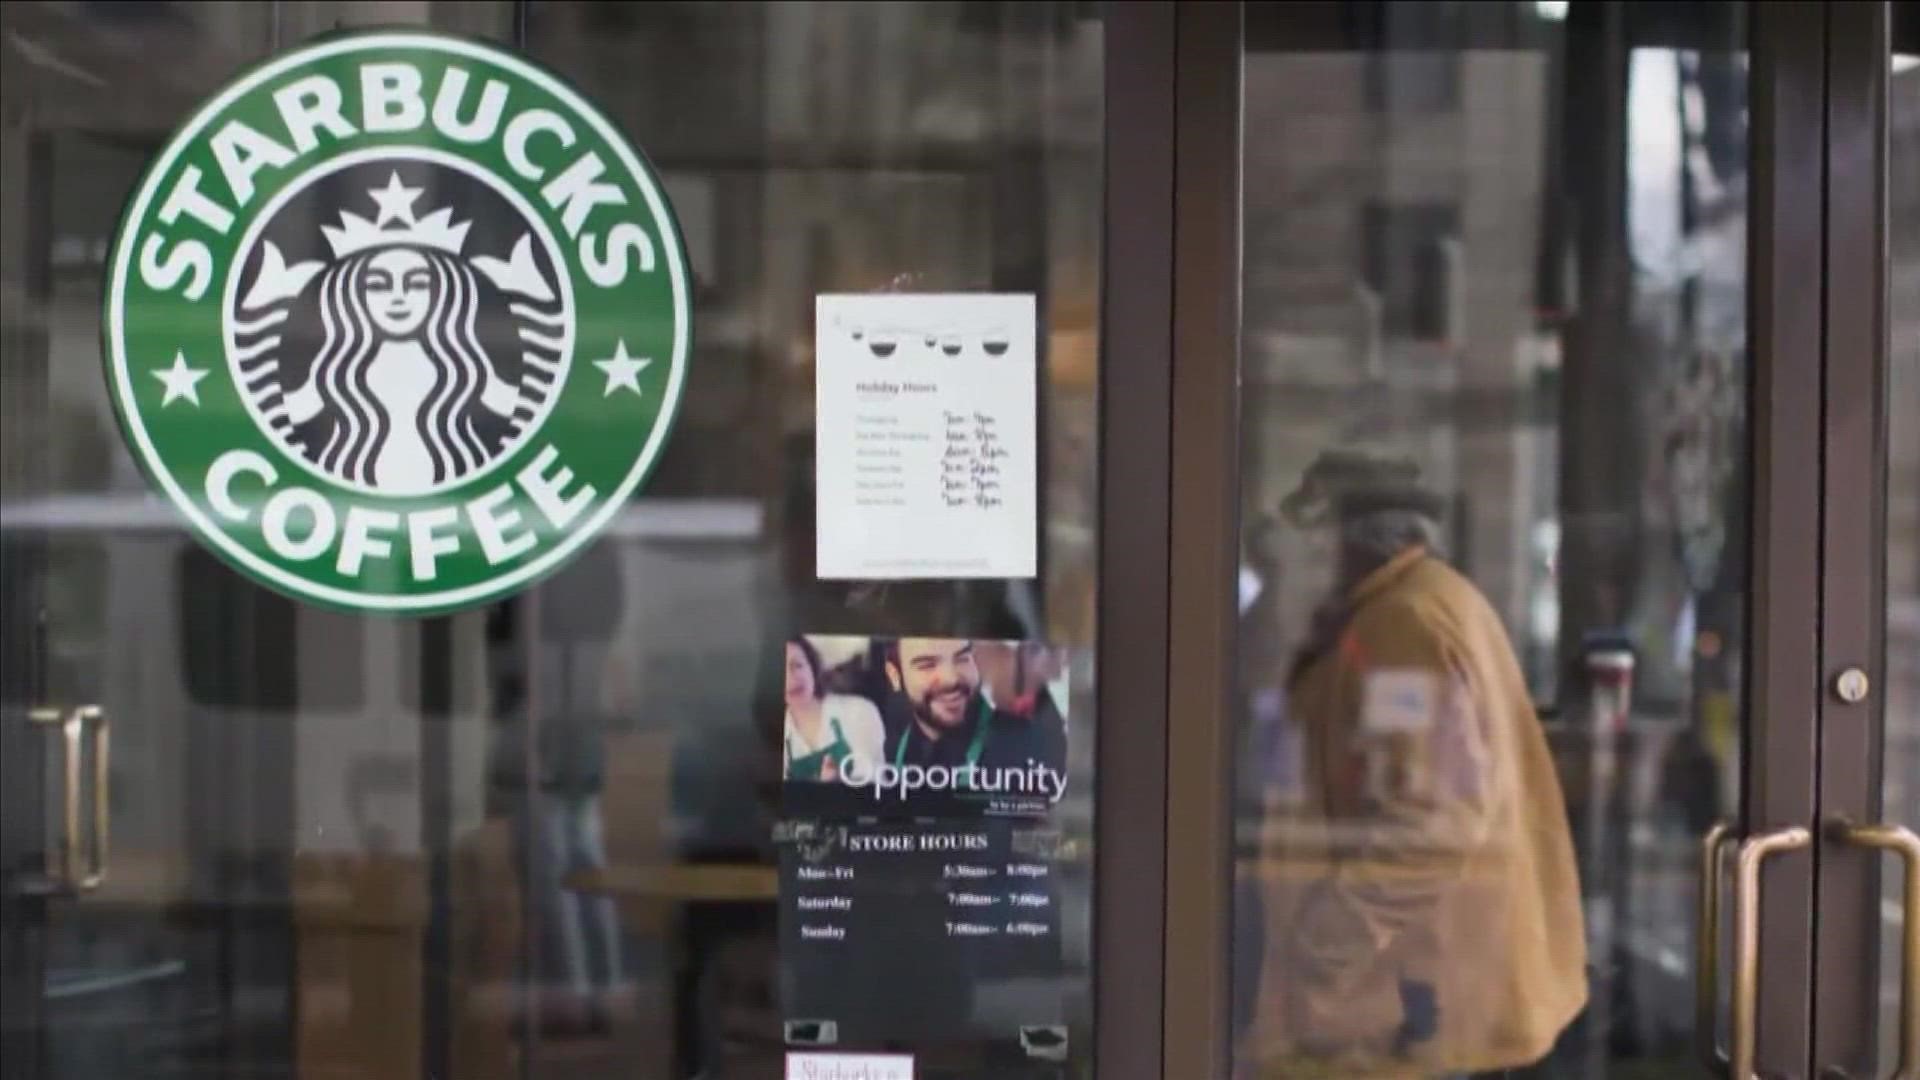 A federal judge Thursday ordered Starbucks to immediately reinstate the fired workers within five days.